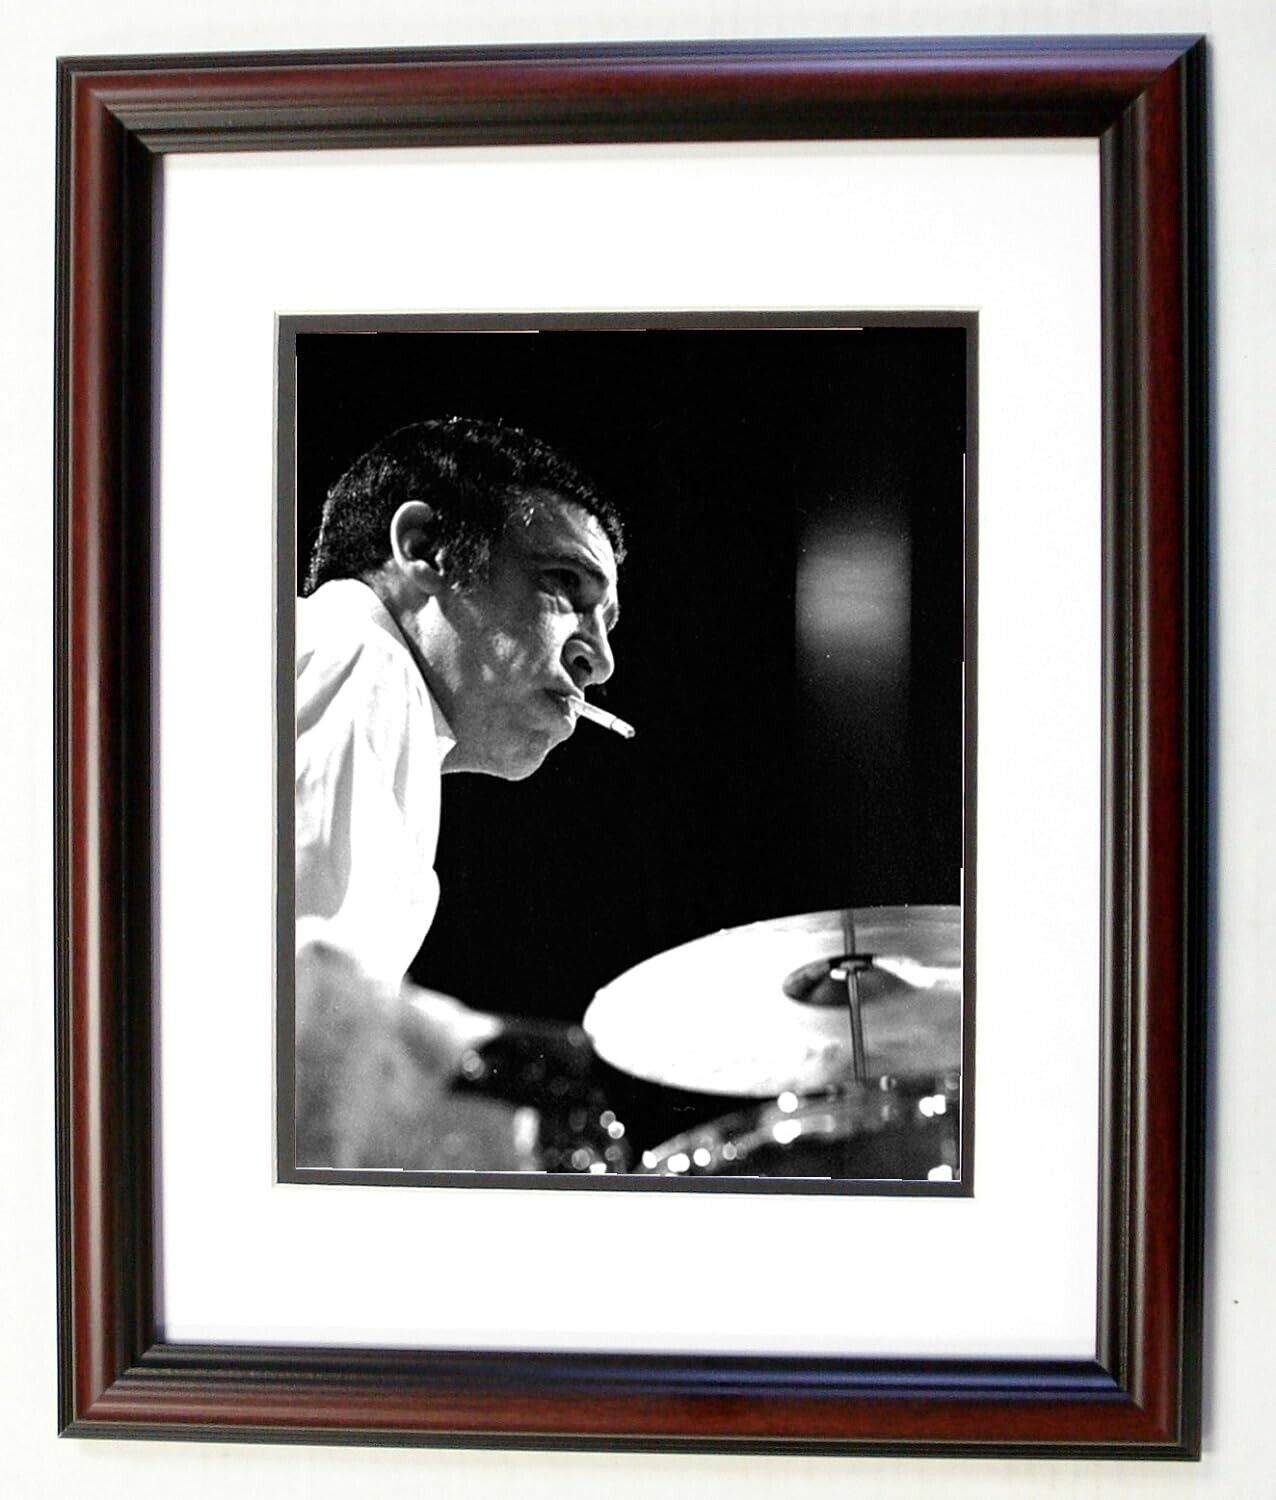 Buddy Rich 8x10 Photo in 11x14 Matted Cherry Frame #6